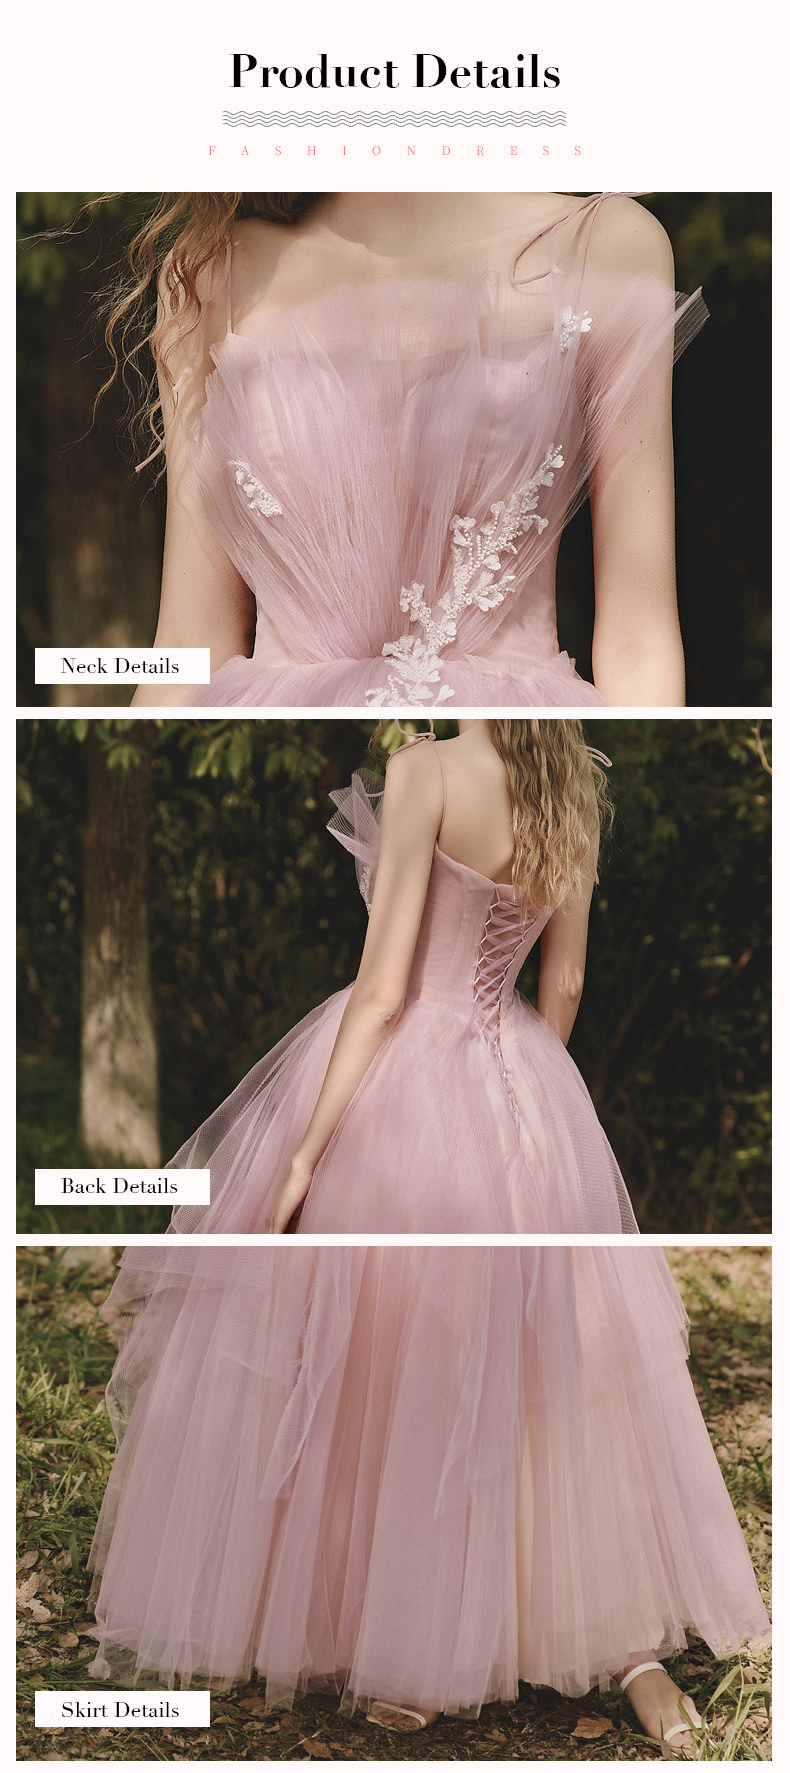 Fairy-Pink-Tulle-Layered-Lace-Slip-Dress-Long-Evening-Party-Gown14.jpg